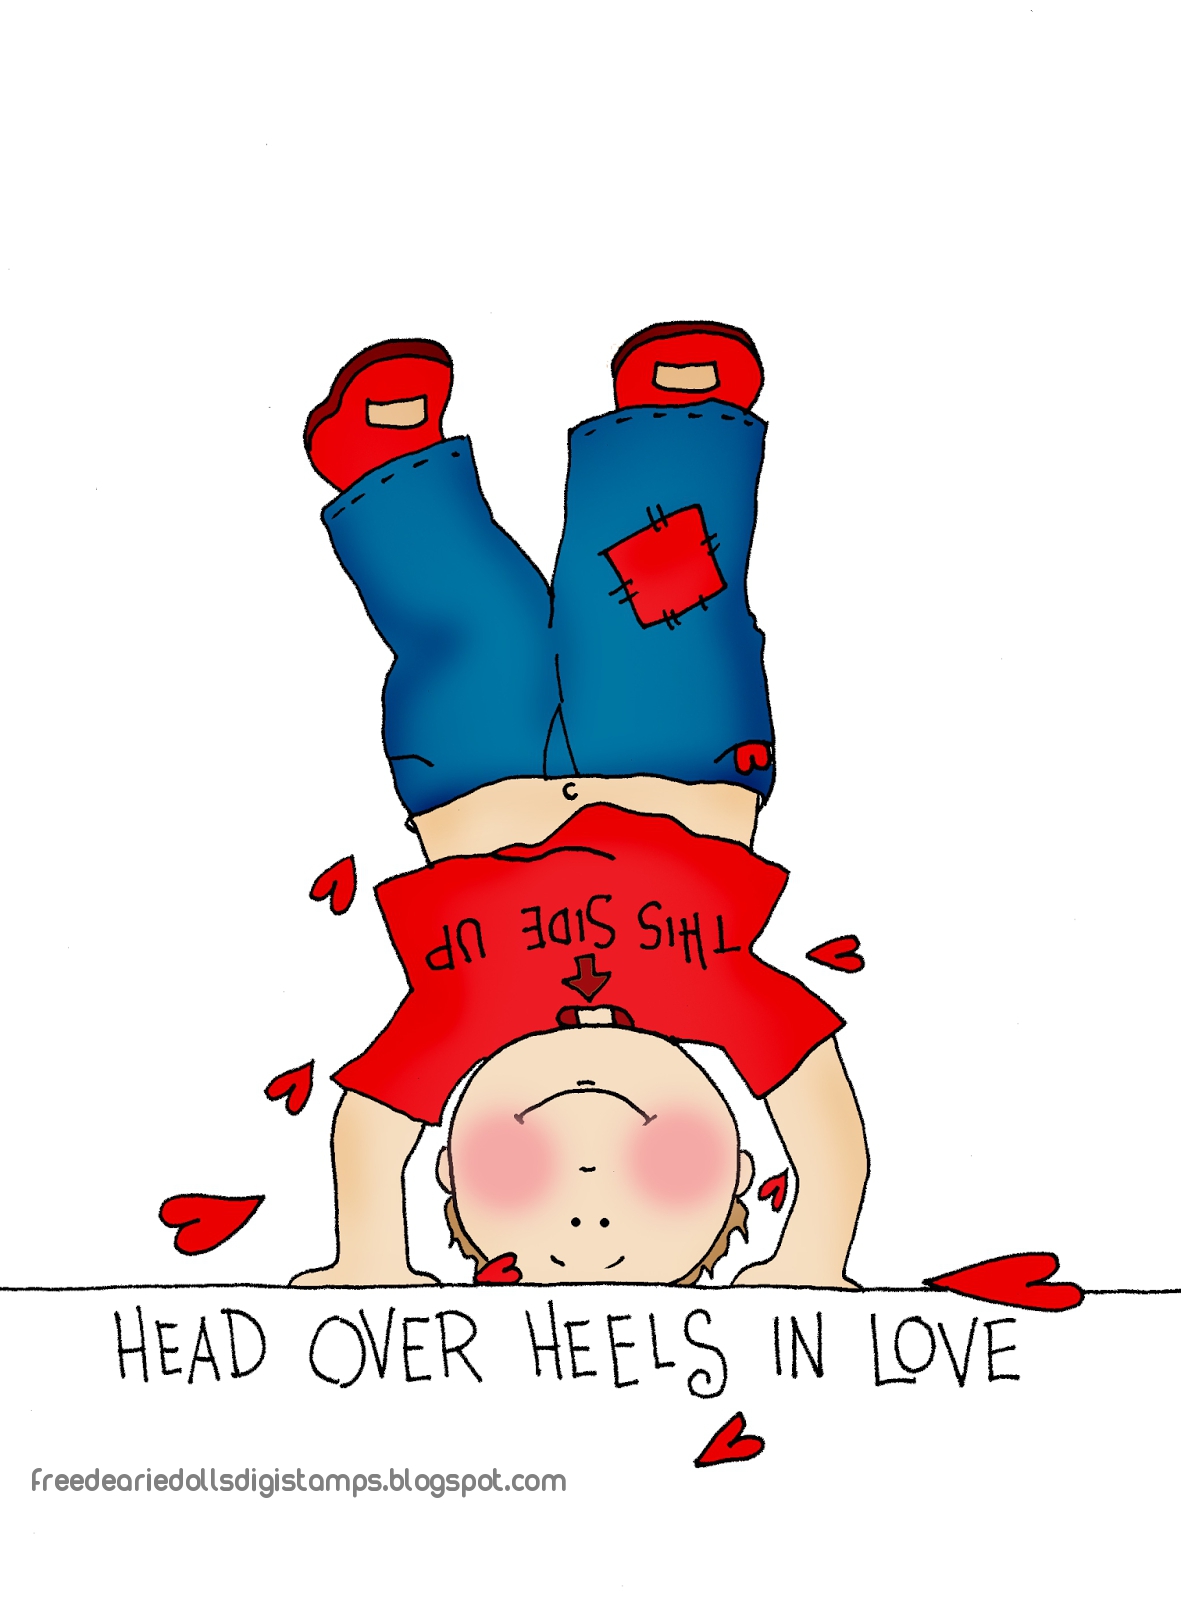 Head over heels - Definition, Meaning & Synonyms | Vocabulary.com